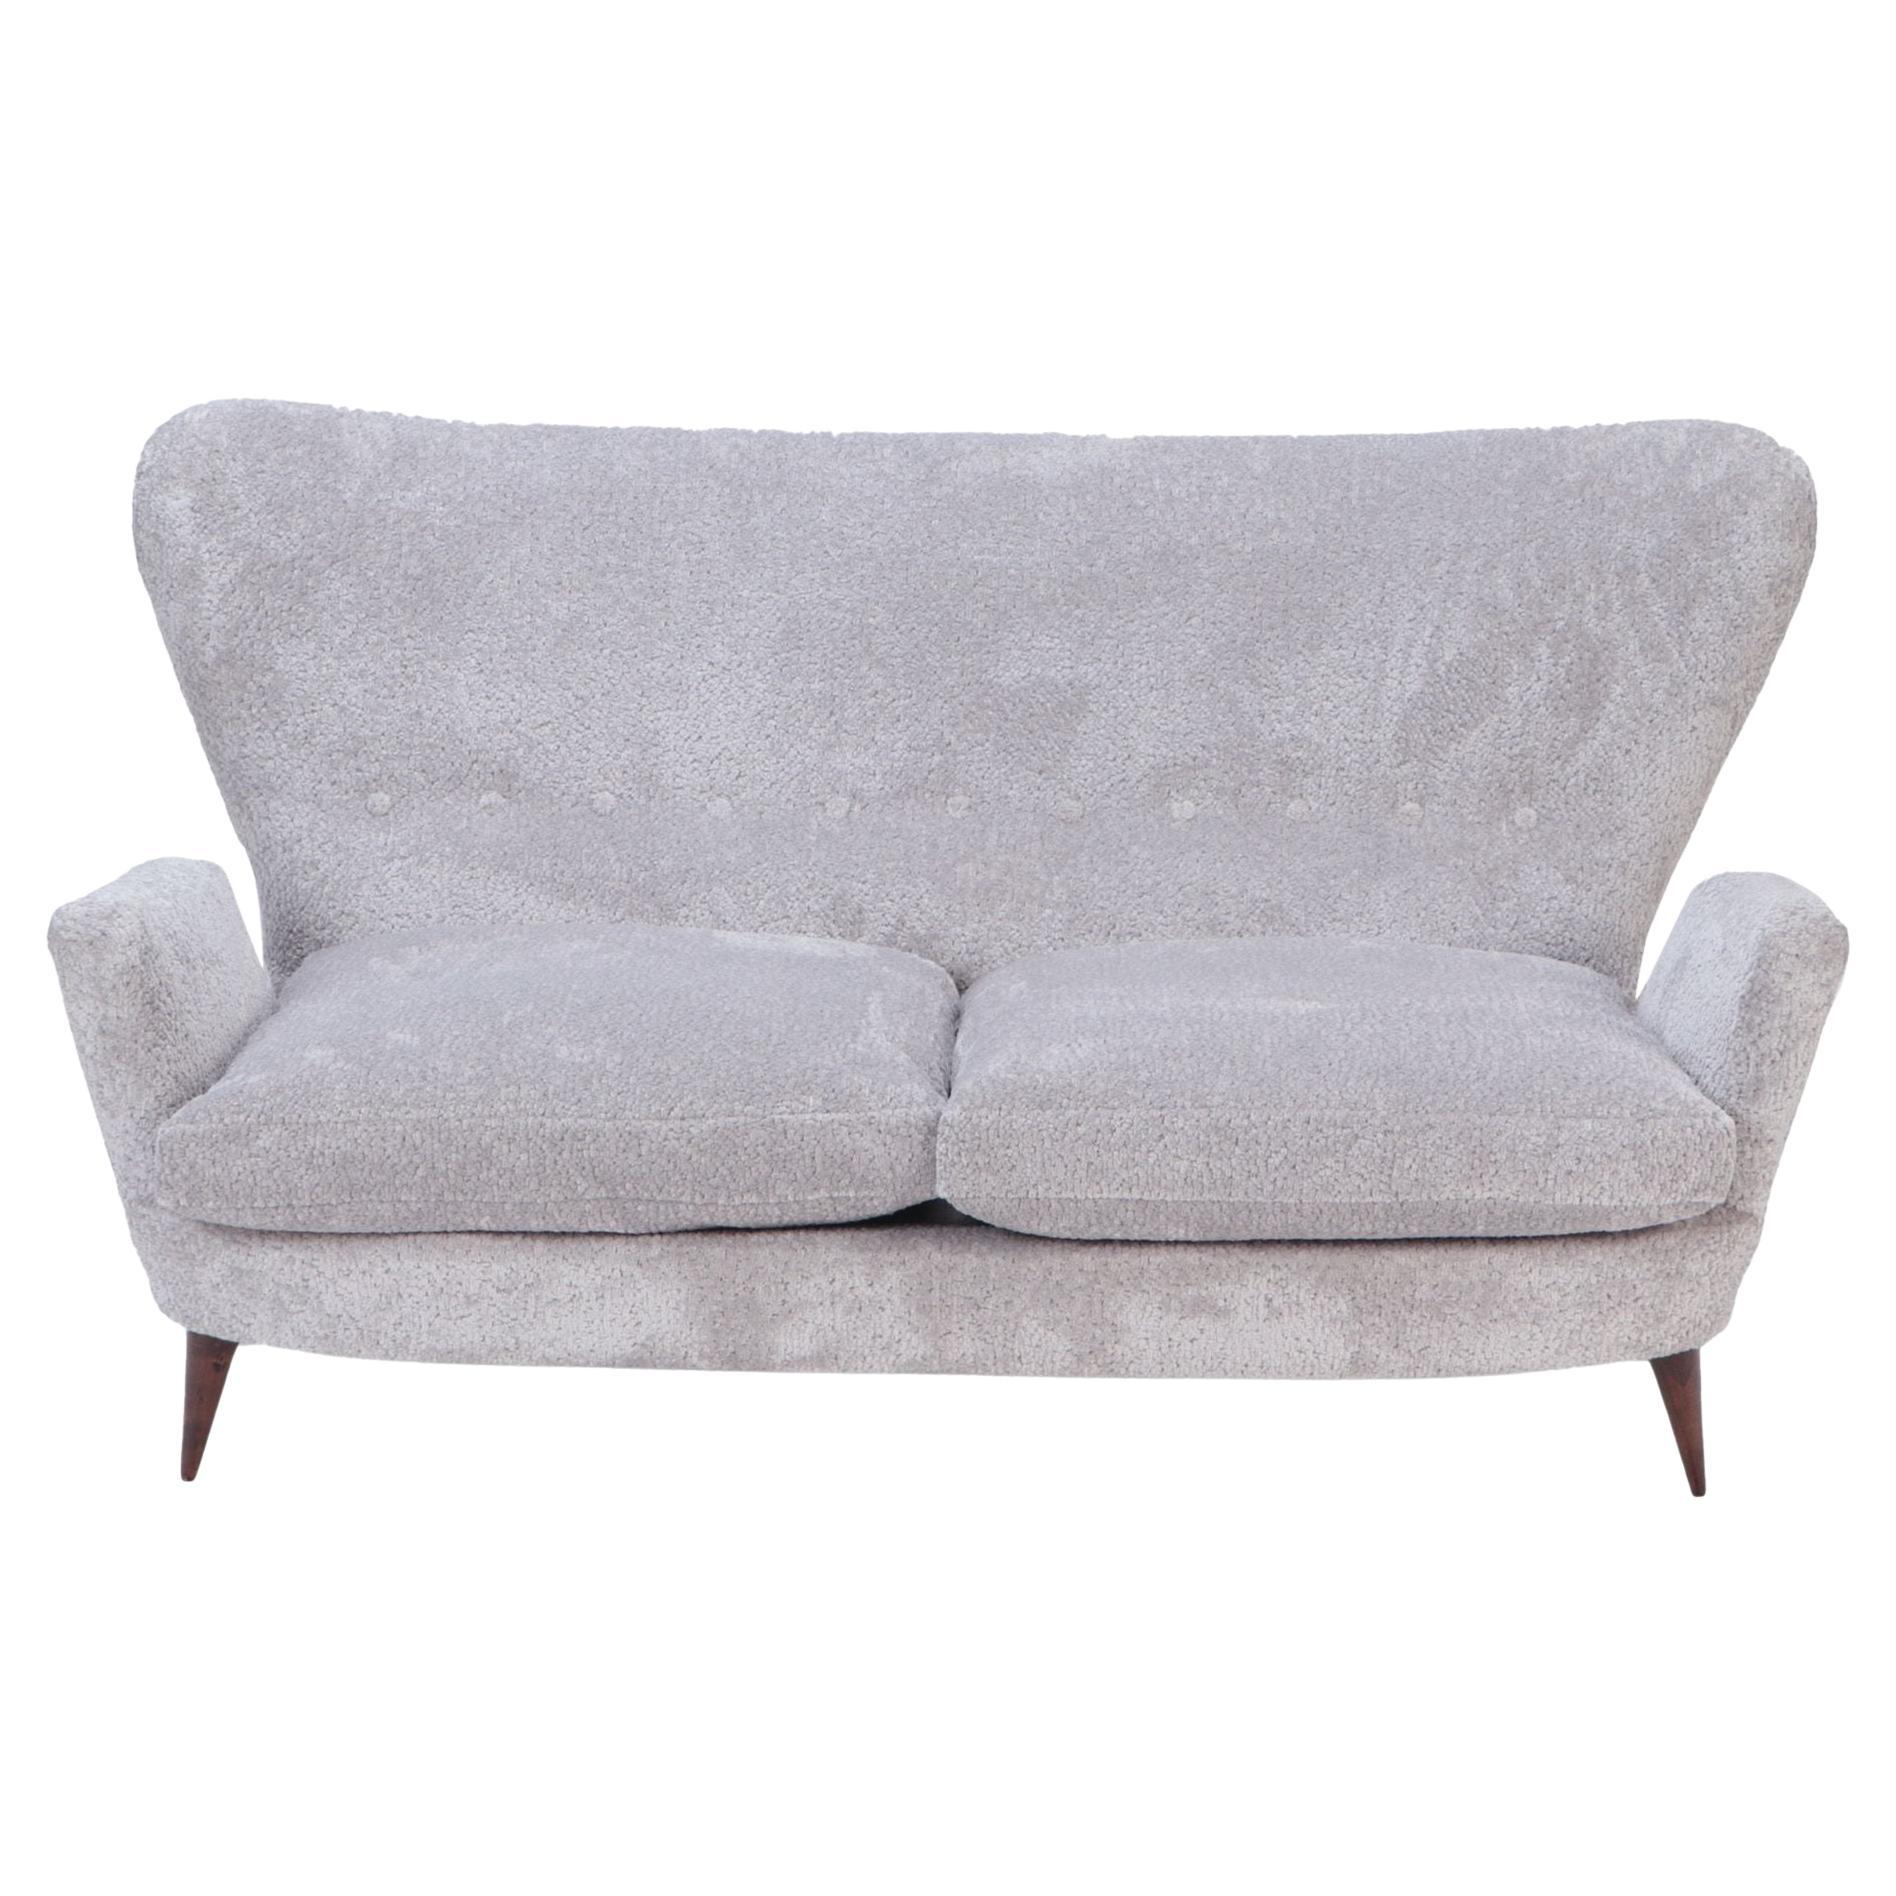 An Italian vintage wingback drop arm upholstered settee.